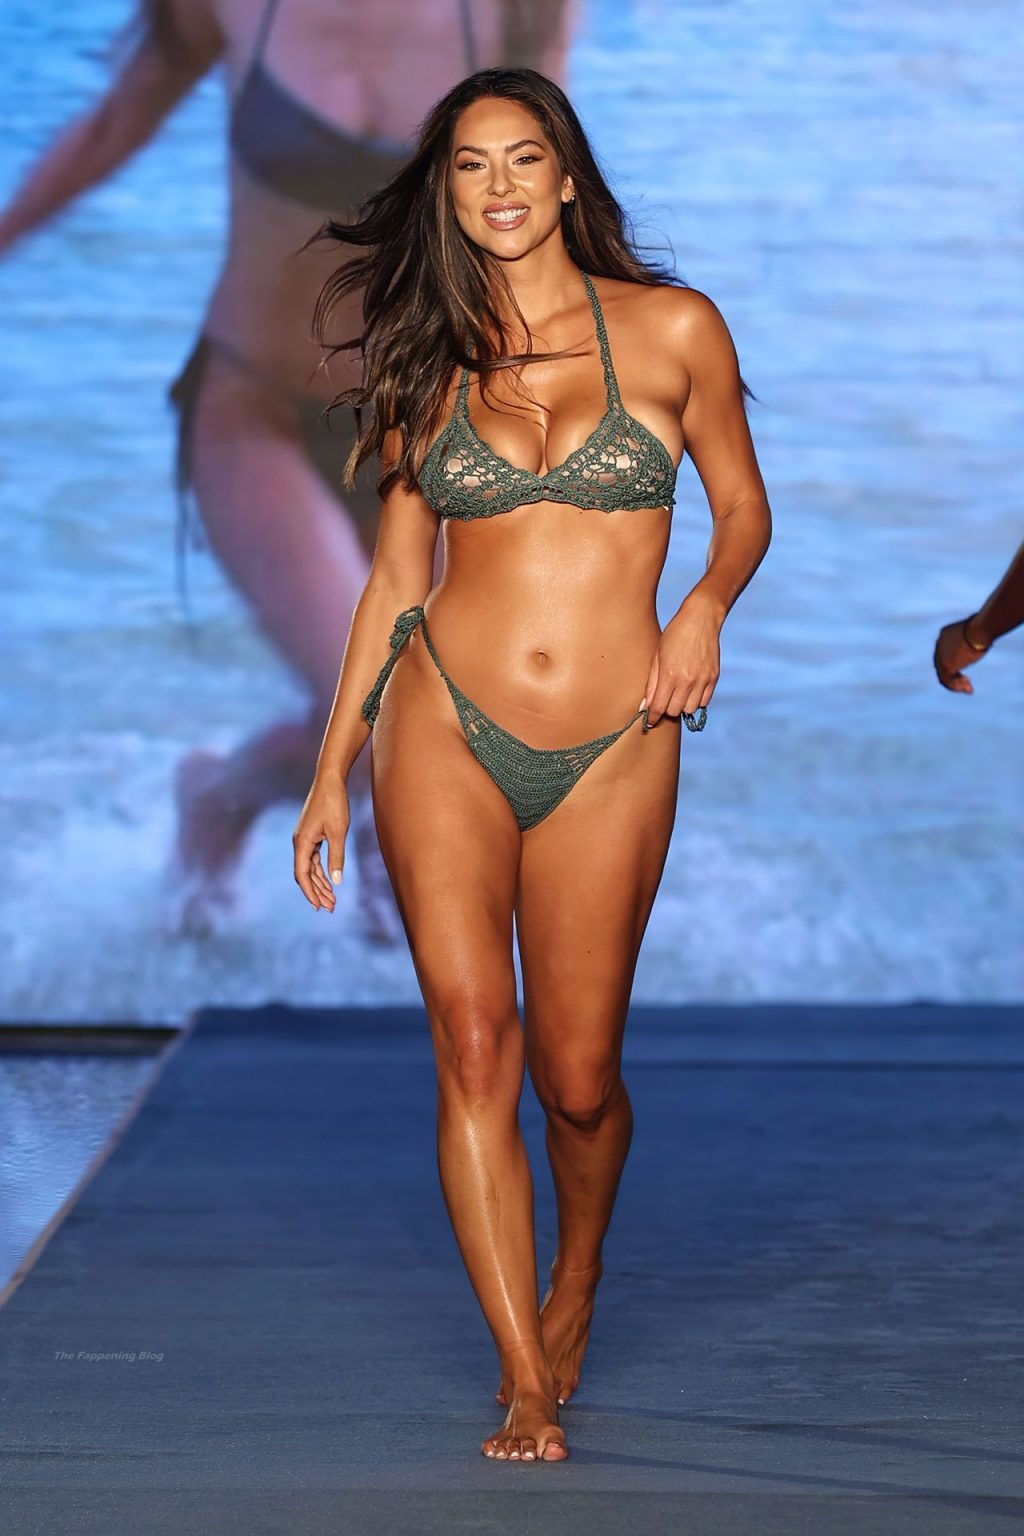 Christen Harper Shows Off Her Beautiful Body at the 2021 Sports Illustrated Swimsuit Runway Show (54 Photos)